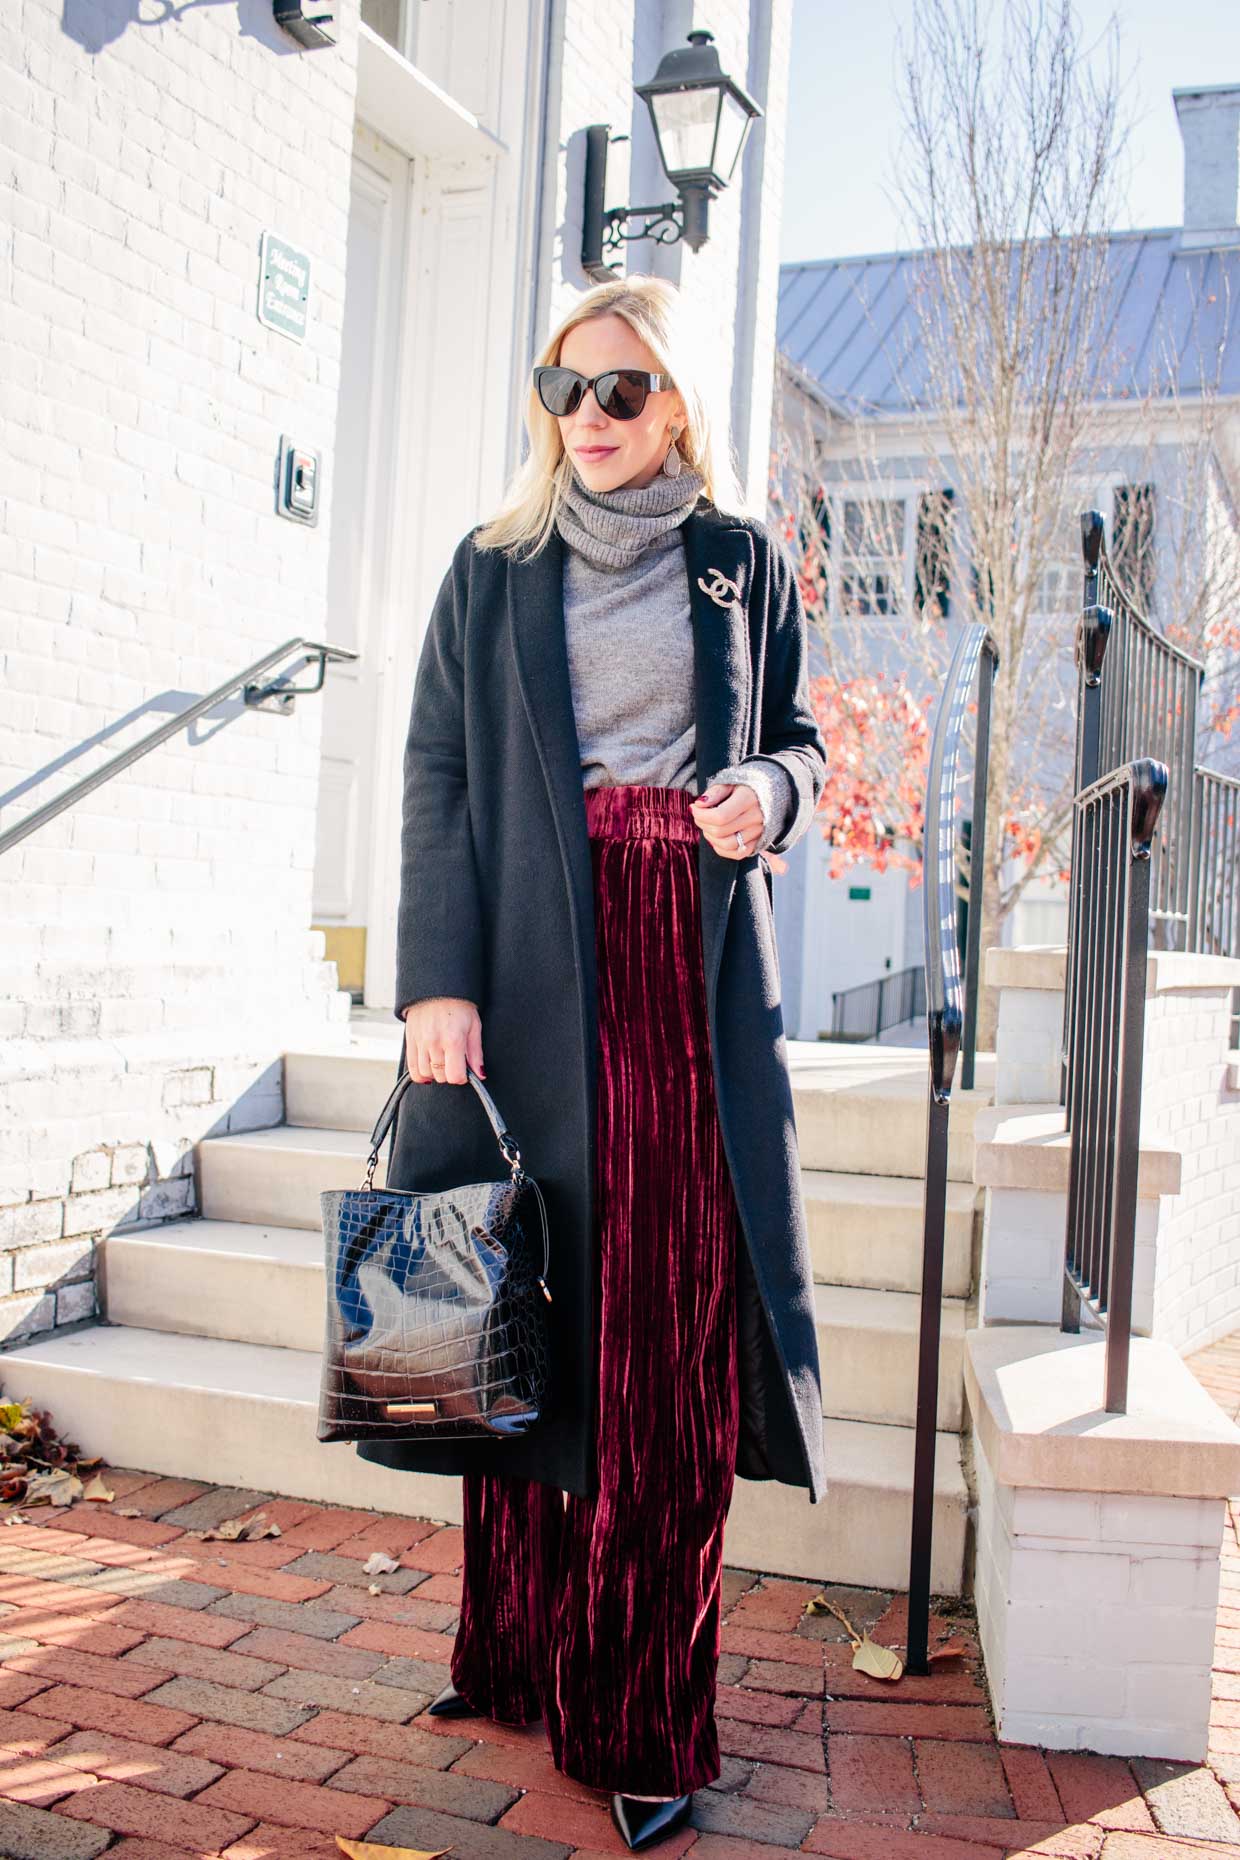 https://www.meagansmoda.com/wp-content/uploads/2019/12/Meagan-Brandon-fashion-blogger-of-Meagans-Moda-wears-Max-Mara-long-black-cashmere-coat-with-Chanel-brooch-and-red-velvet-wide-leg-pants-velvet-pants-holiday-outfit.jpg